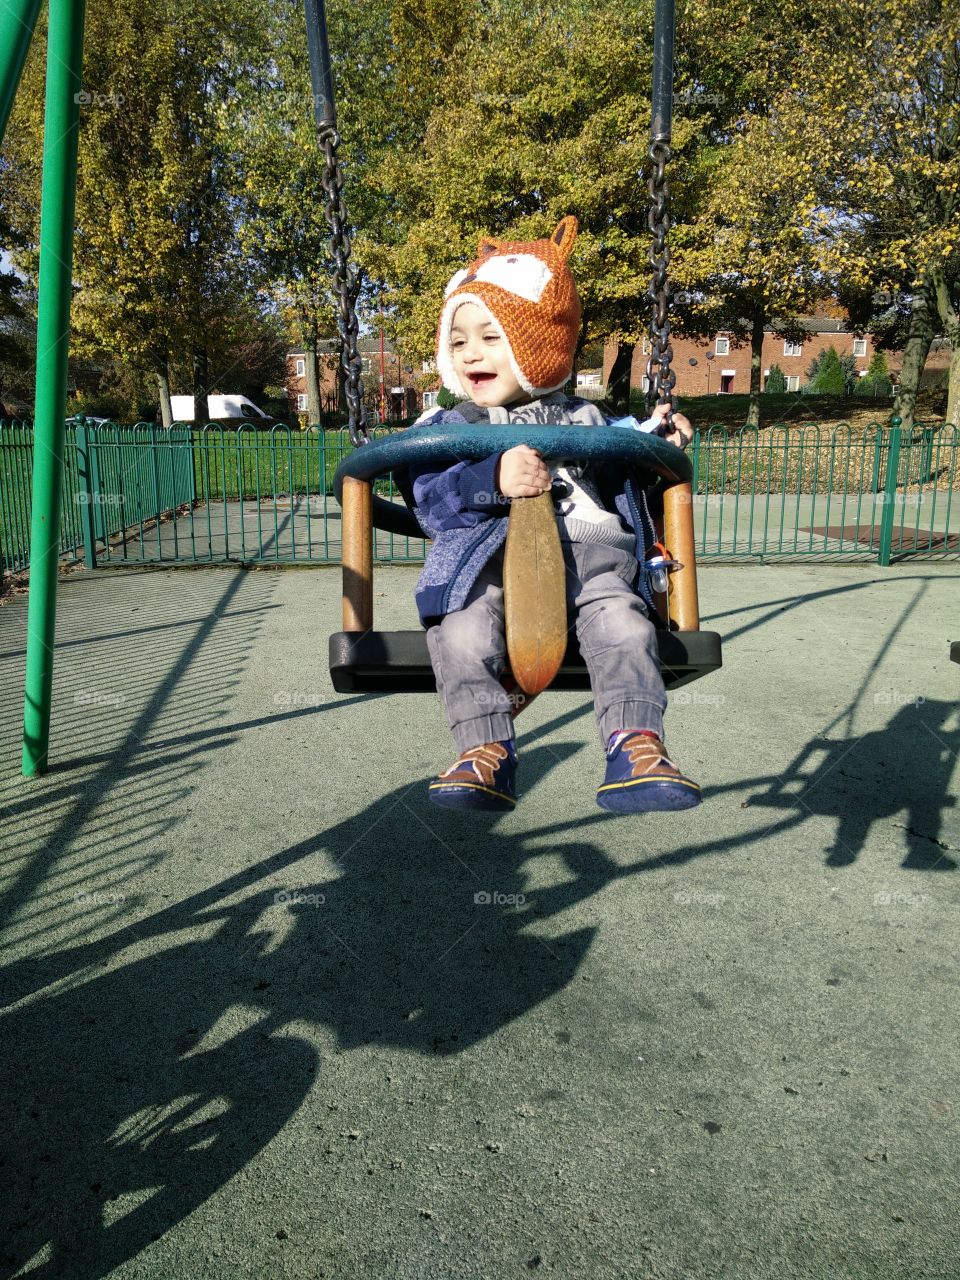 Small child playing on swing